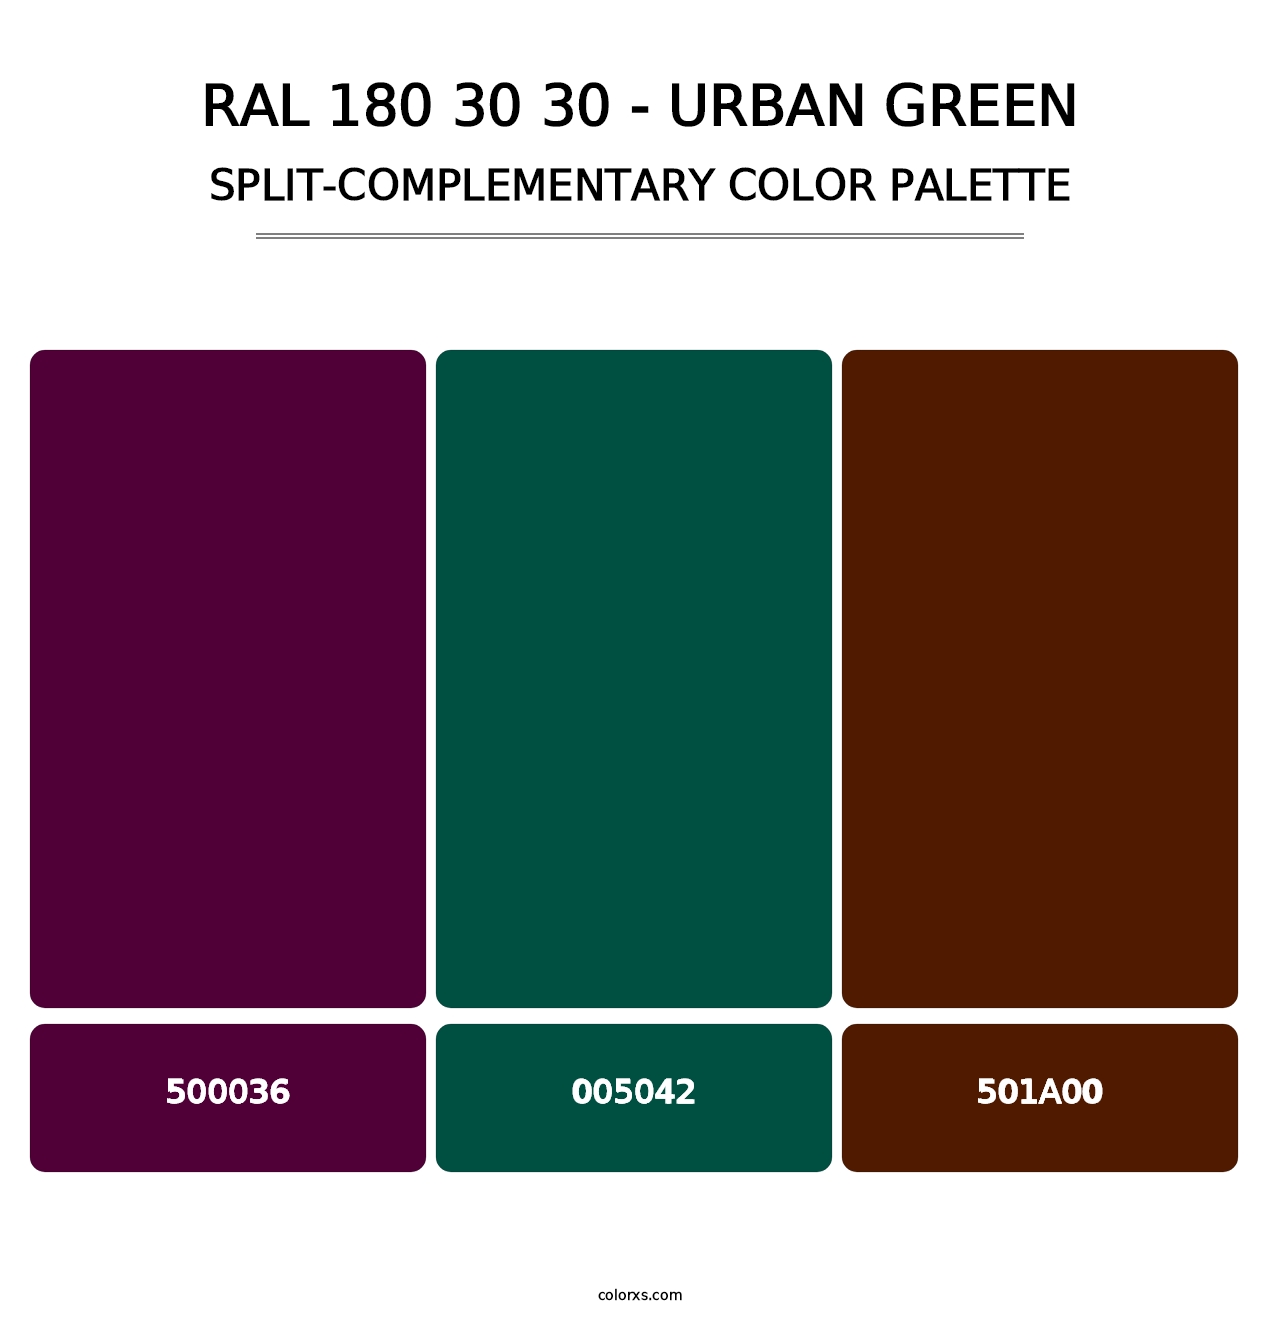 RAL 180 30 30 - Urban Green - Split-Complementary Color Palette